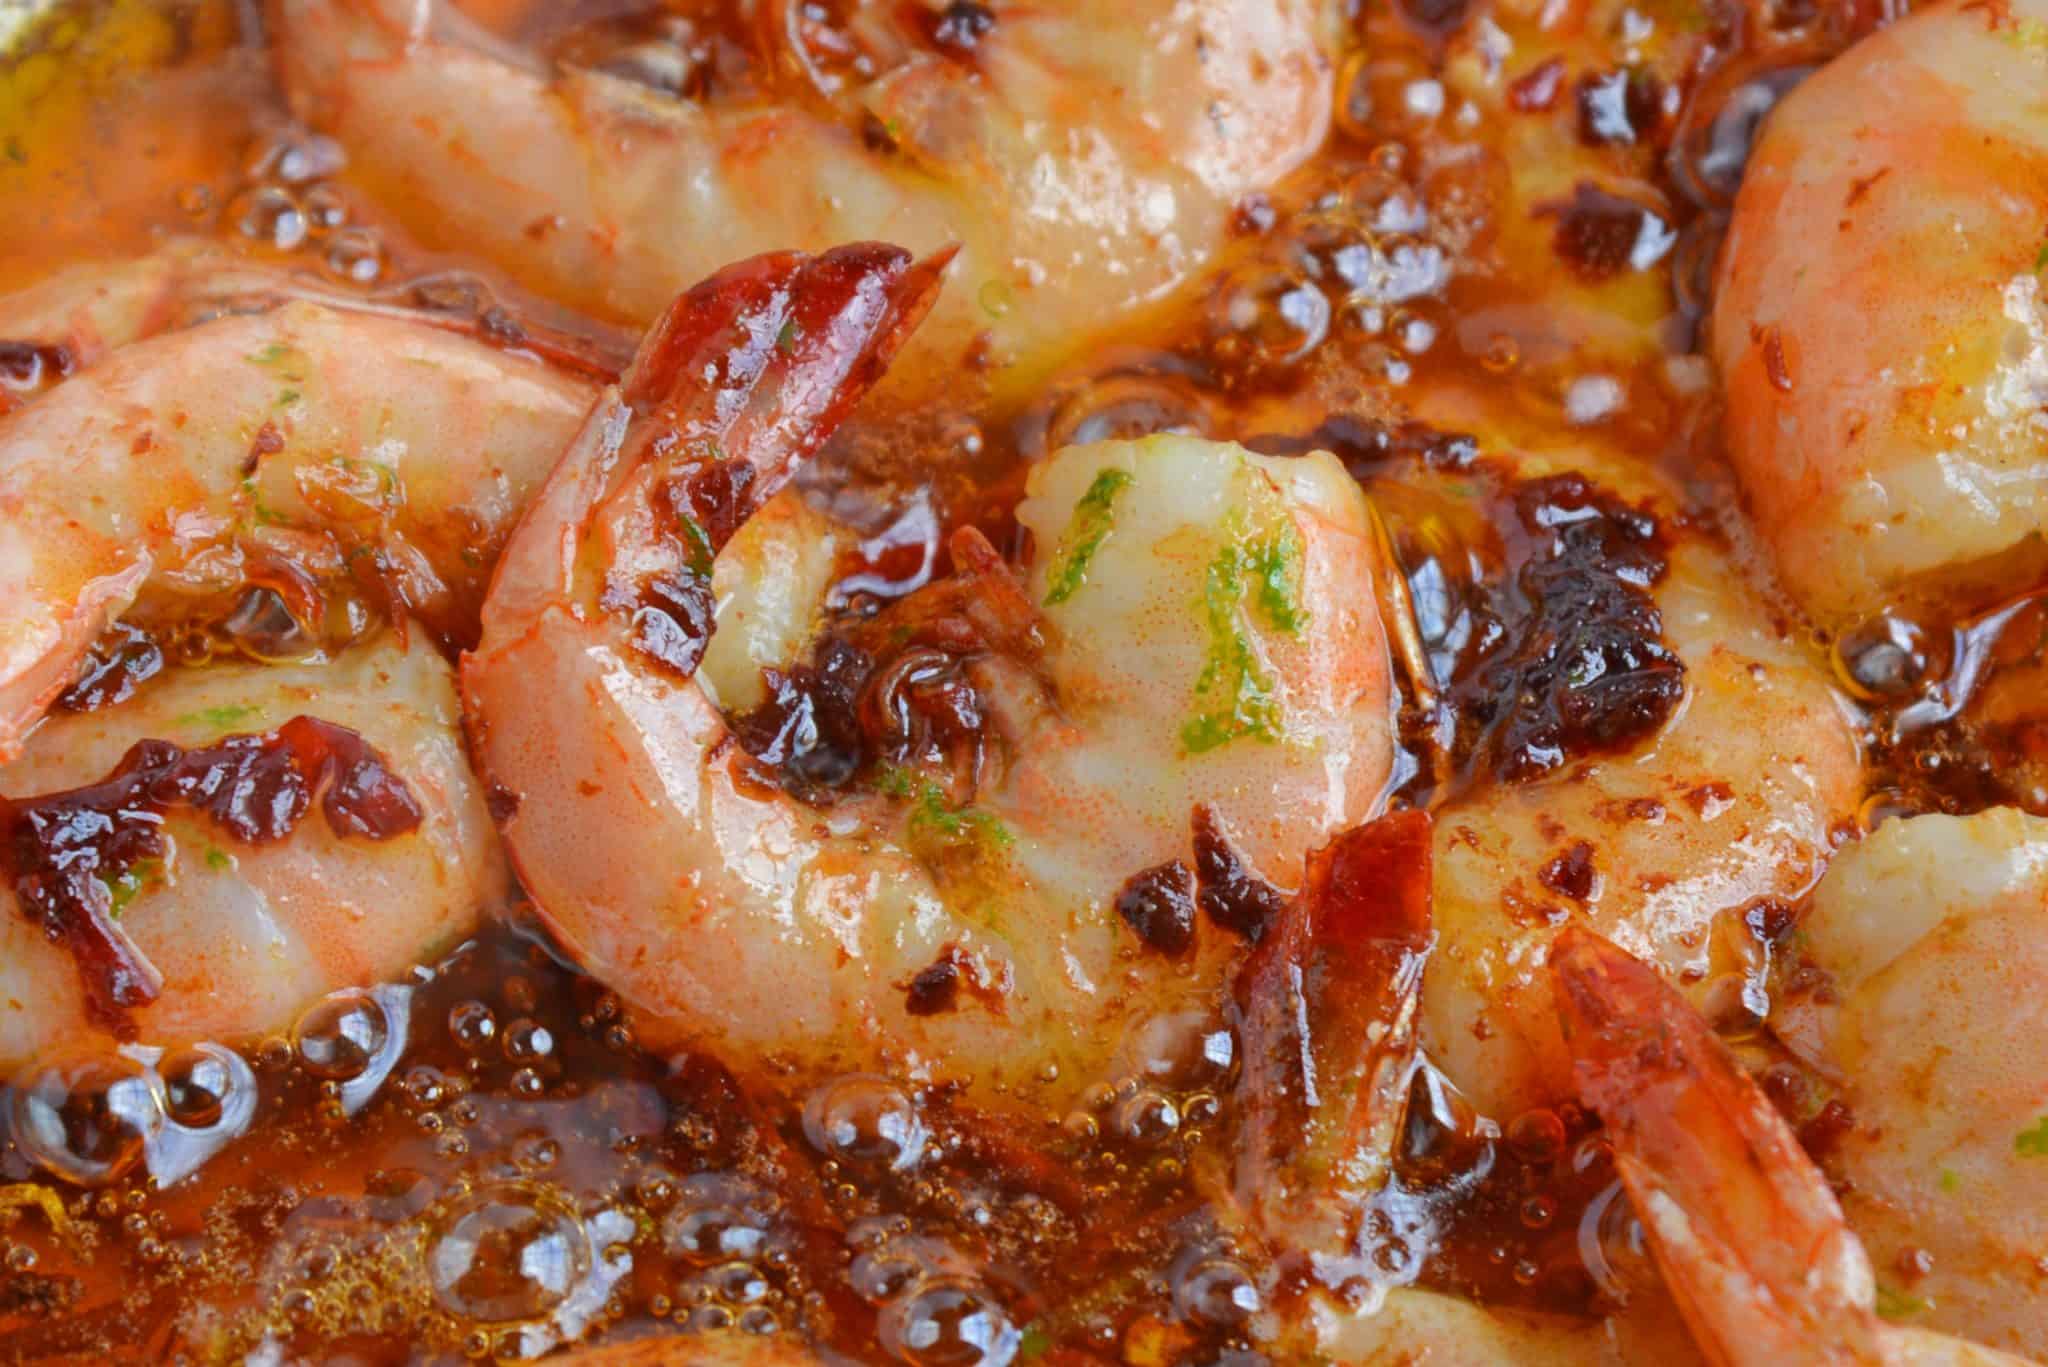 Chipotle Lime Buttered Shrimp is a delicious, spicy shrimp recipe! The chipotle peppers in adobe sauce with lime juice, make this recipe the perfect appetizer! #spicyshrimprecipe #sauteedshrimp www.savoryexperiments.com